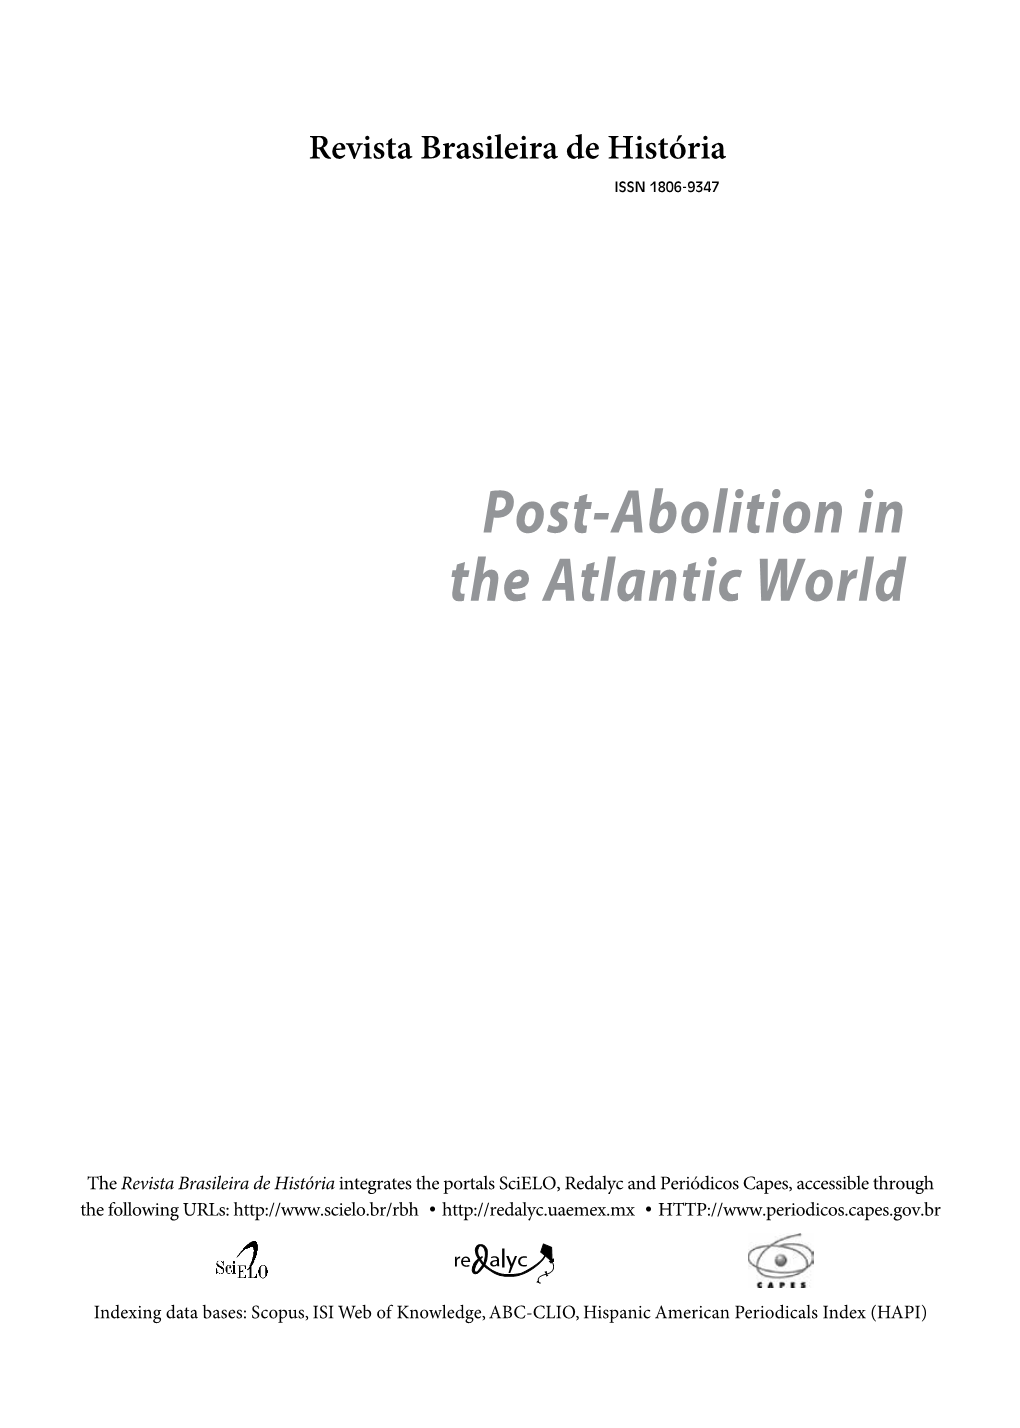 Post-Abolition in the Atlantic World